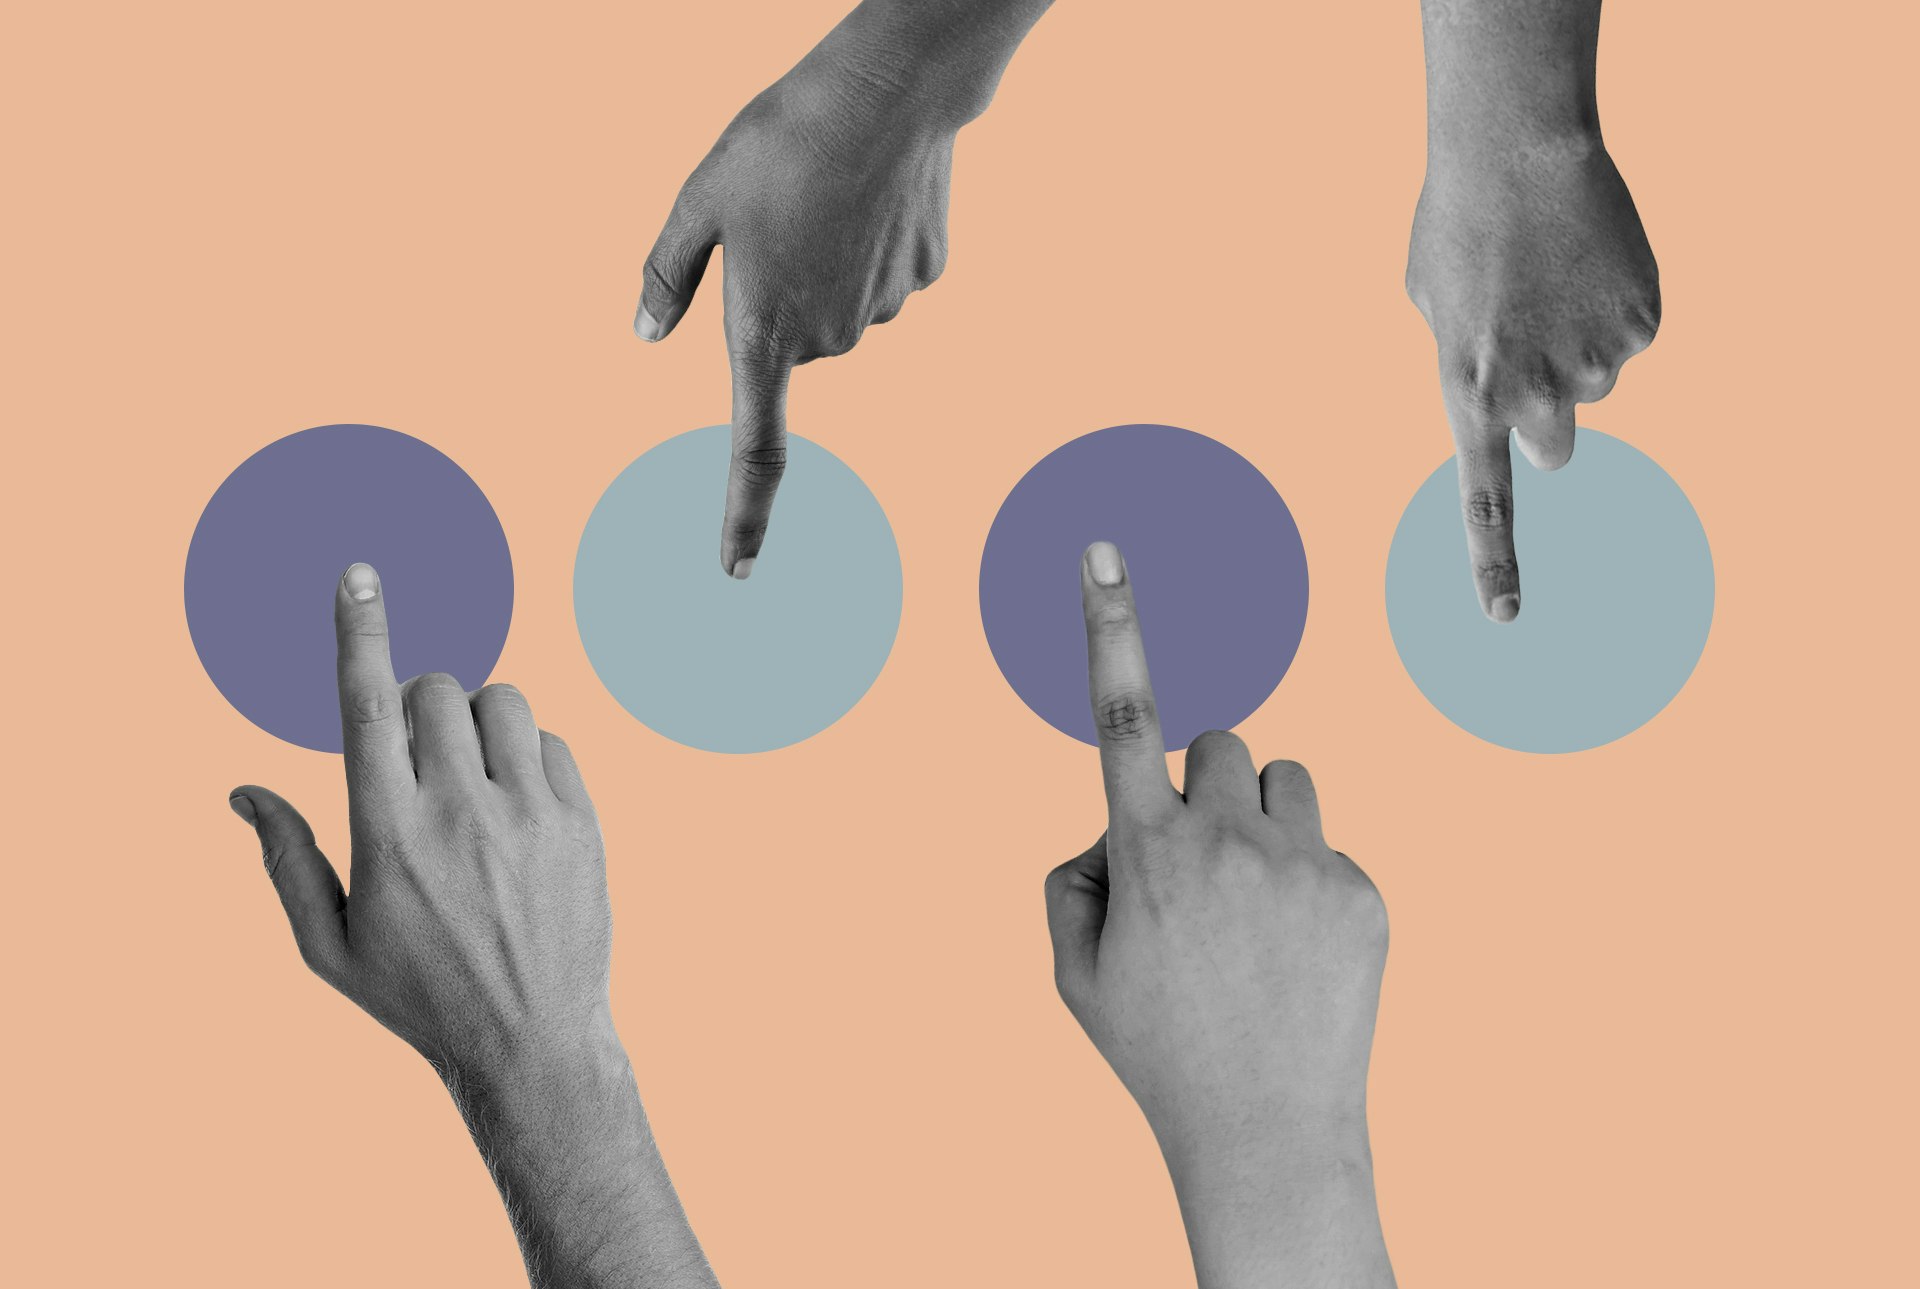 Illustration of hands pressing circles like buttons